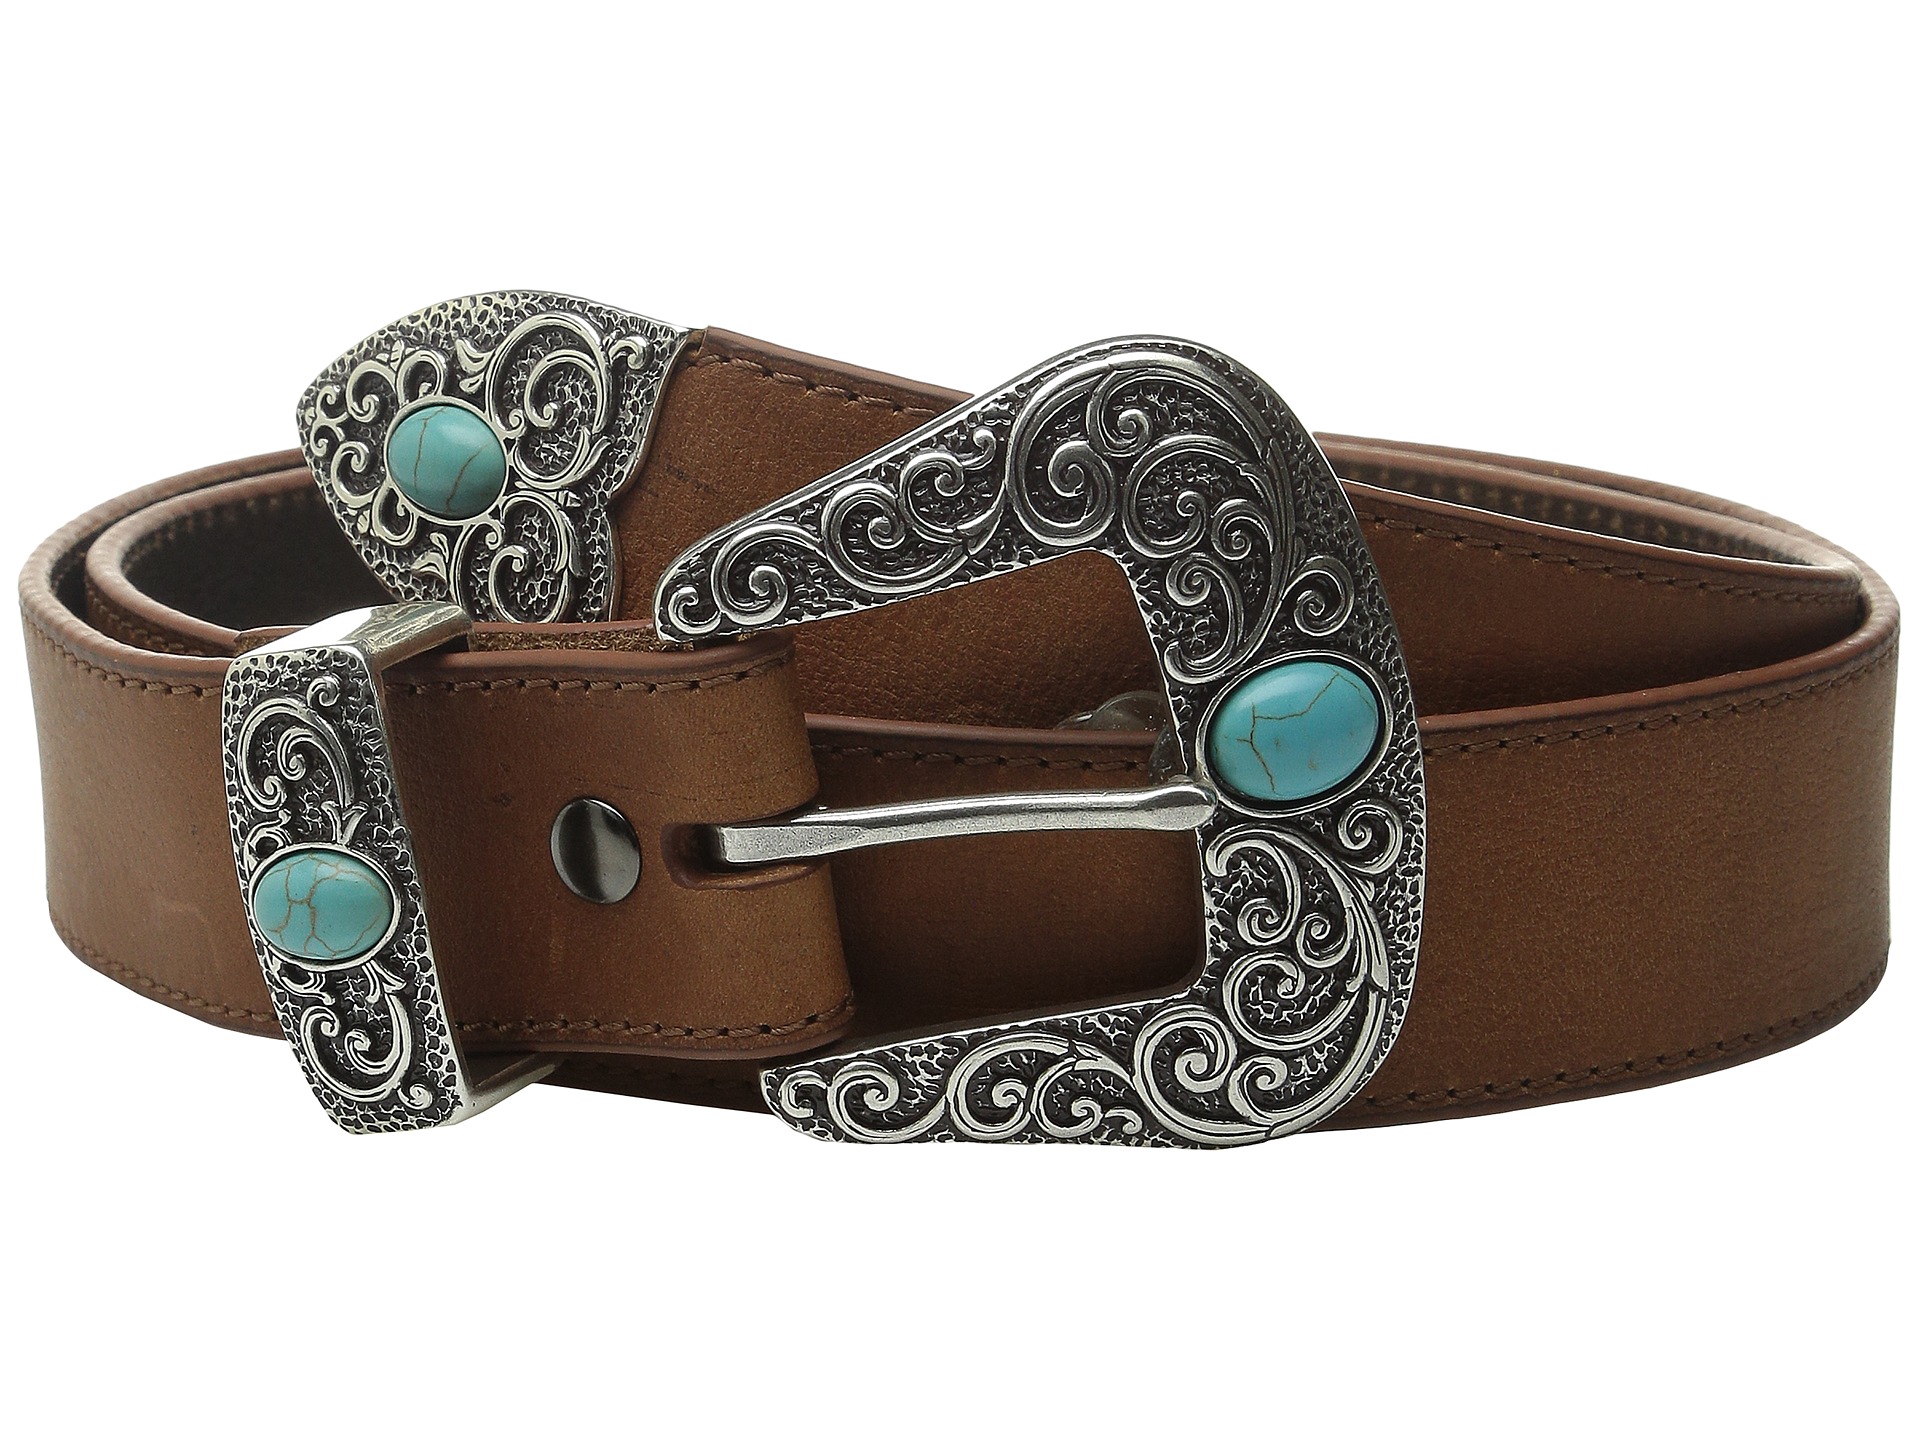 Ariat Turquoise Stone Belt at Zappos.com